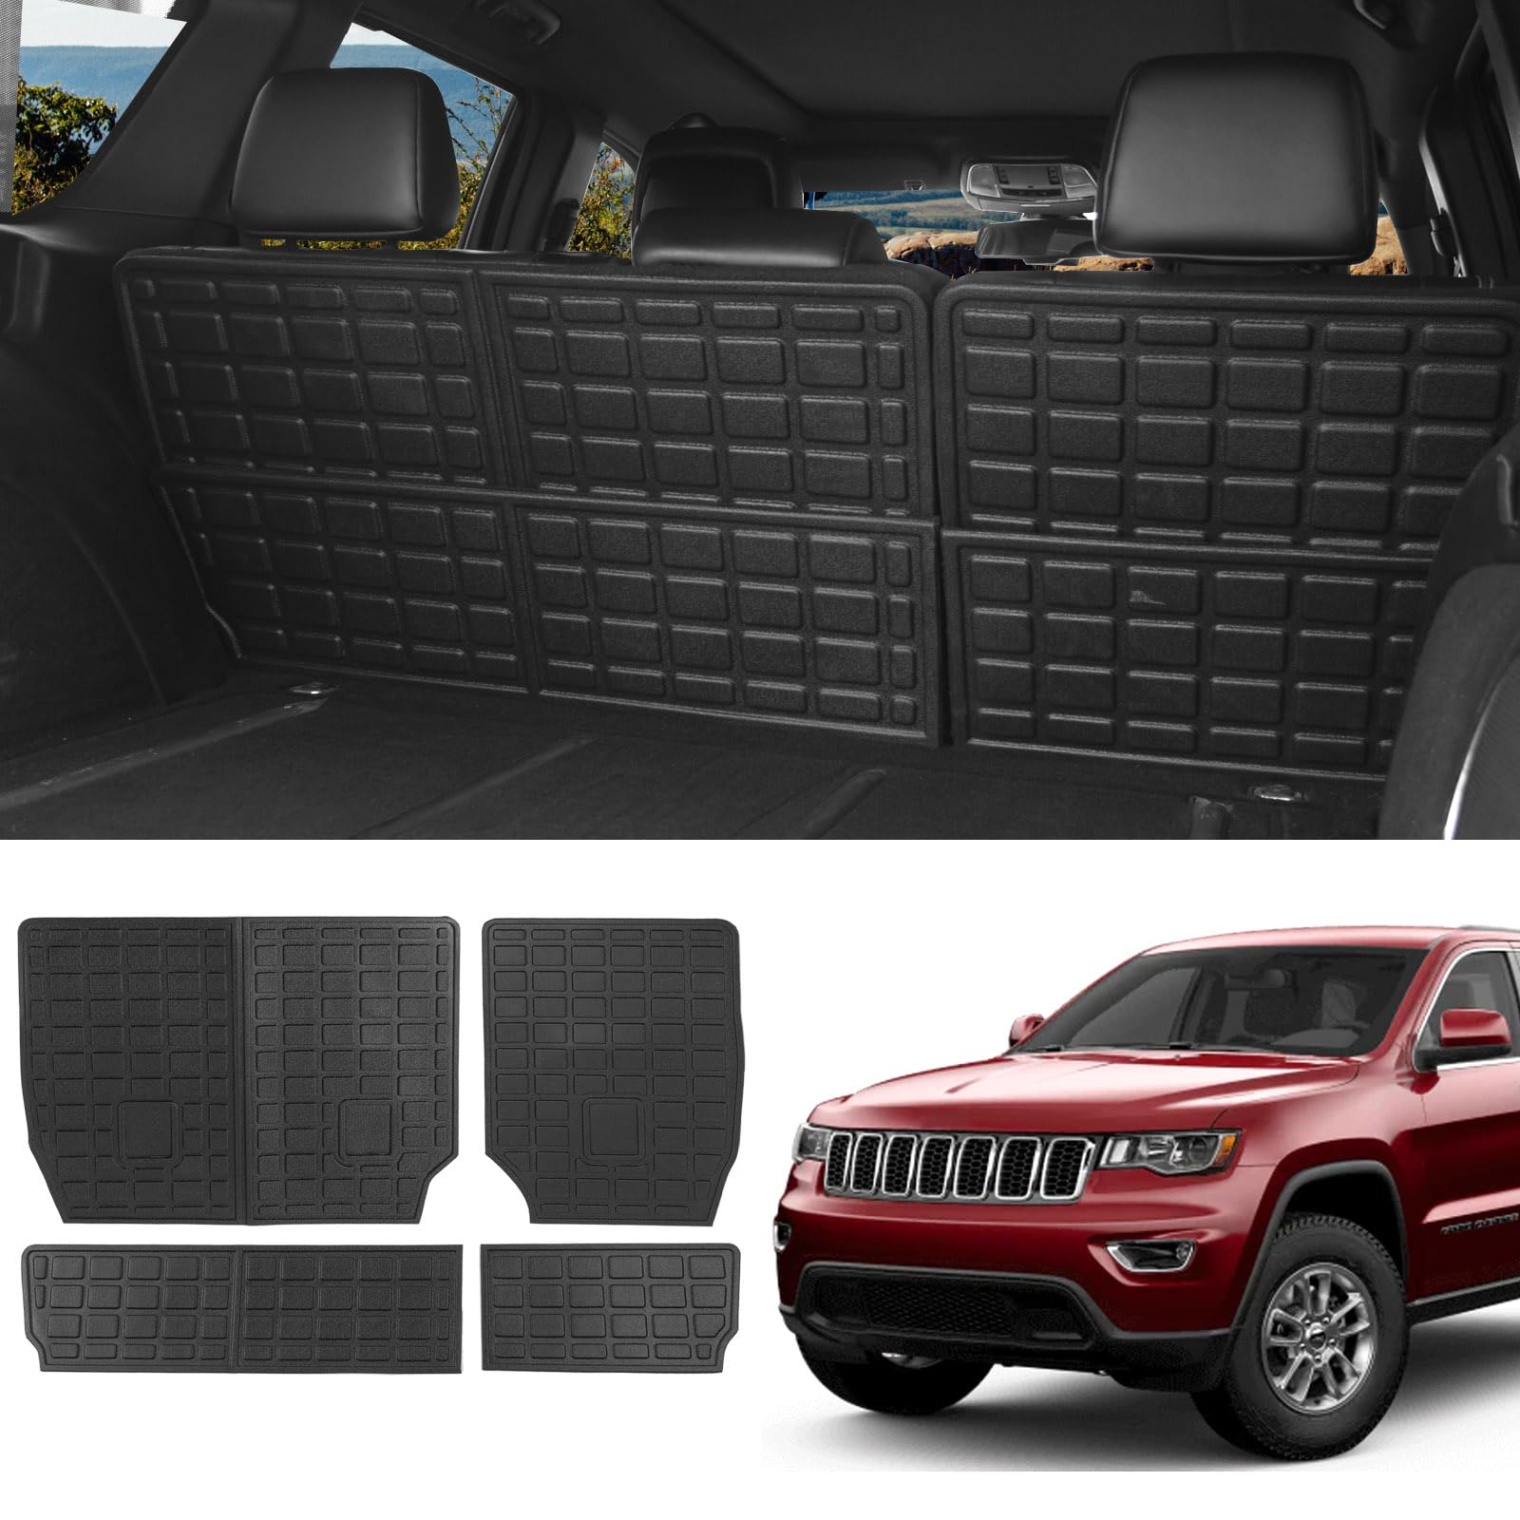 2021 jeep grand cherokee accessories Bulan 1 powoq Backrest Mat Compatible with - Jeep Grand Cherokee    Grand Cherokee WK Backrest Protector Replacement for Jeep Grand Cherokee